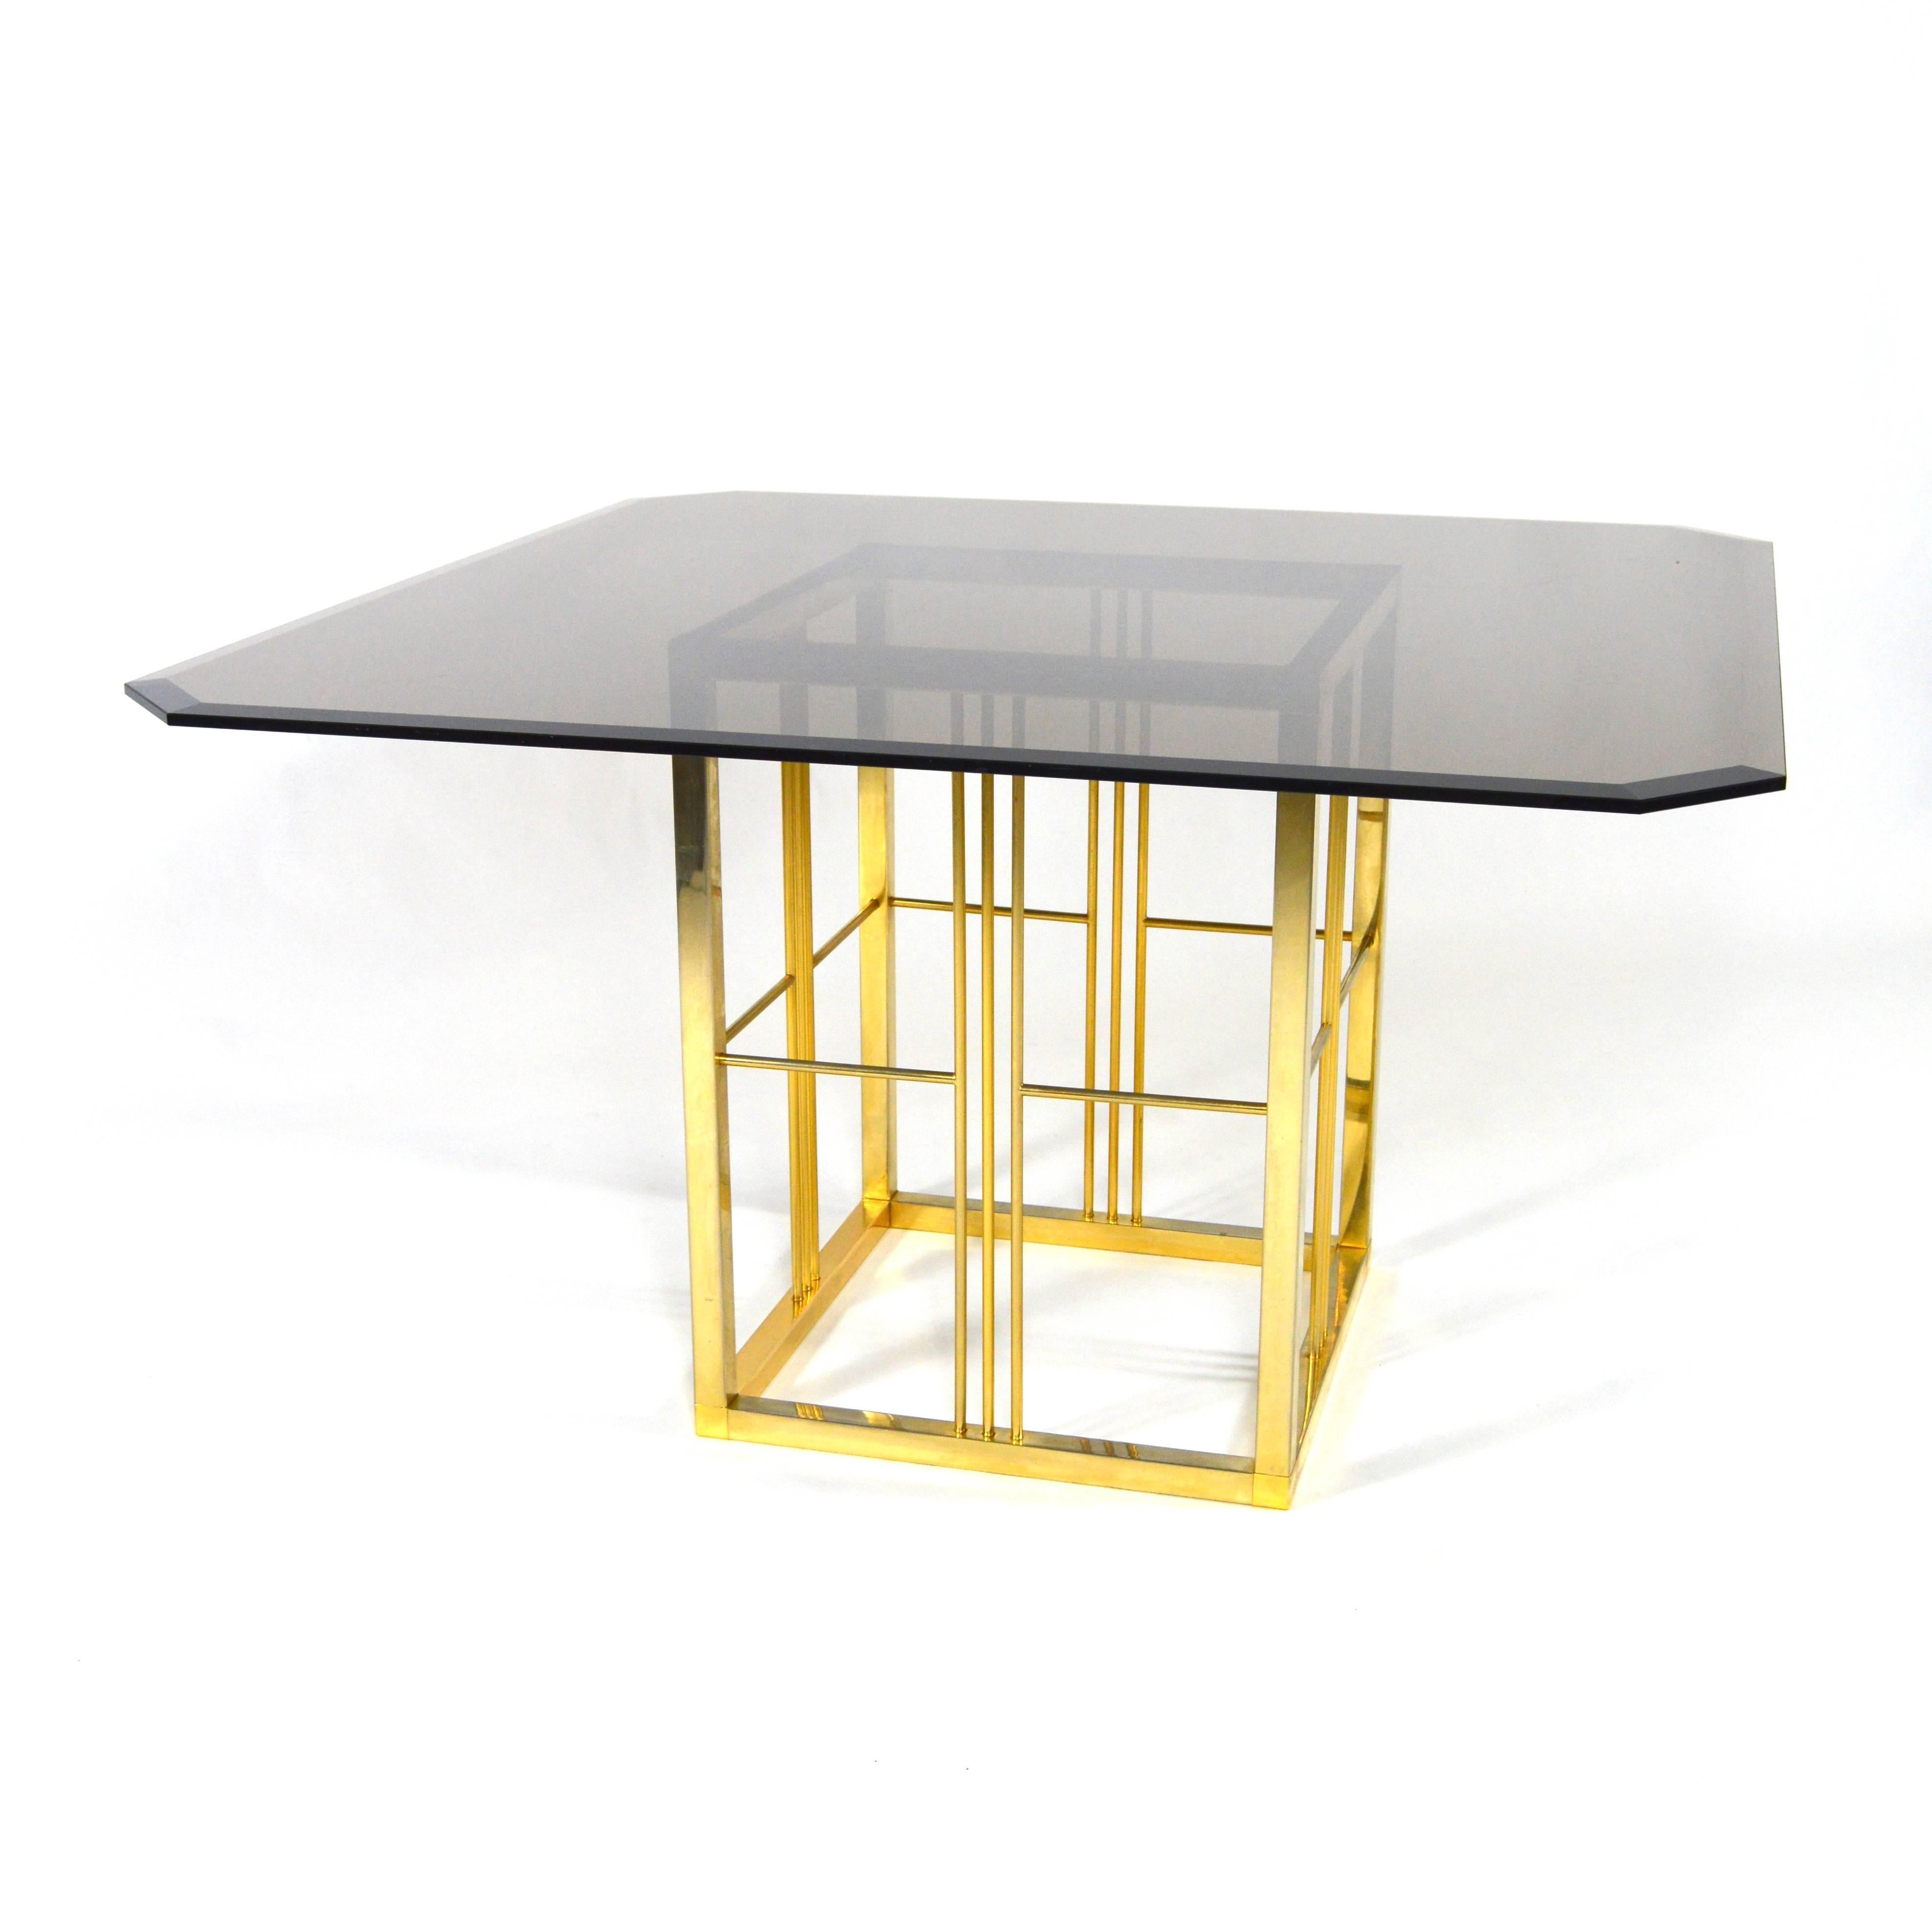 Brass and glass dining table in the style of Pierre Cardin. Beautiful gold brassed base and a smoked glass top of heavy quality with cut corners.
The table is probably of French or Italian origin.
In very good condition with some normal age and